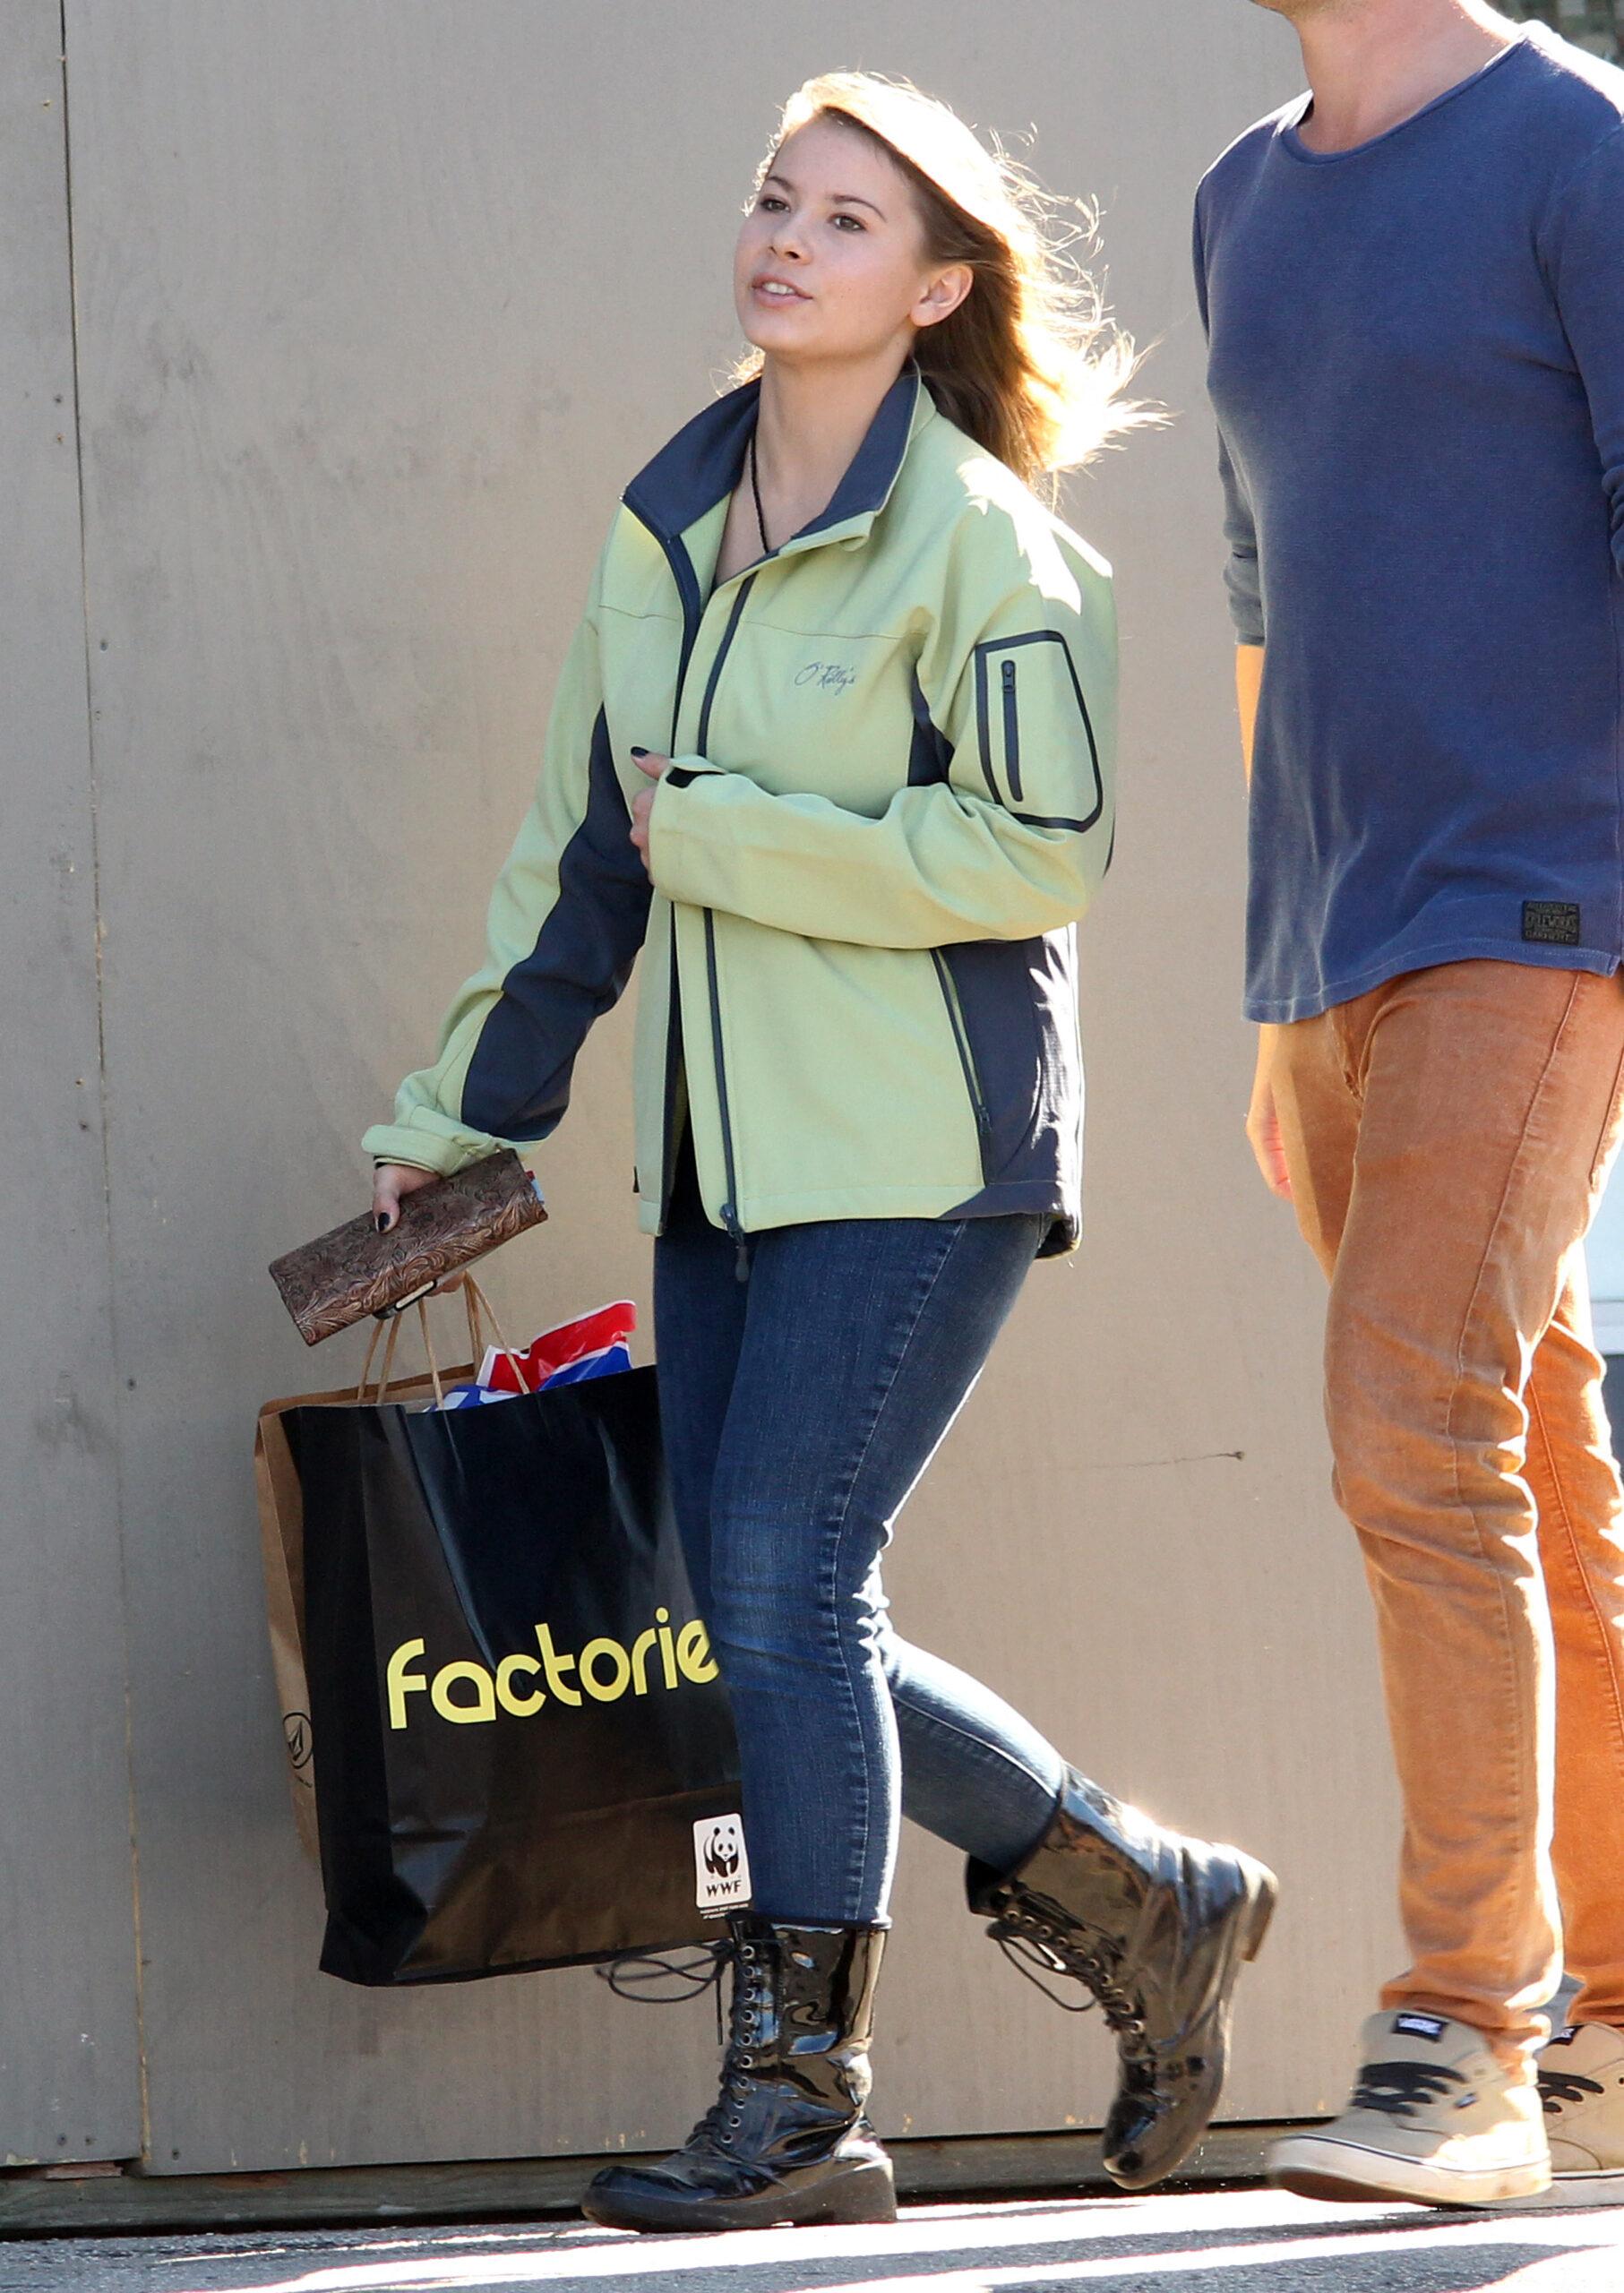 Bindi Irwin out and about in Byron Bay Australia on 27th July 2014